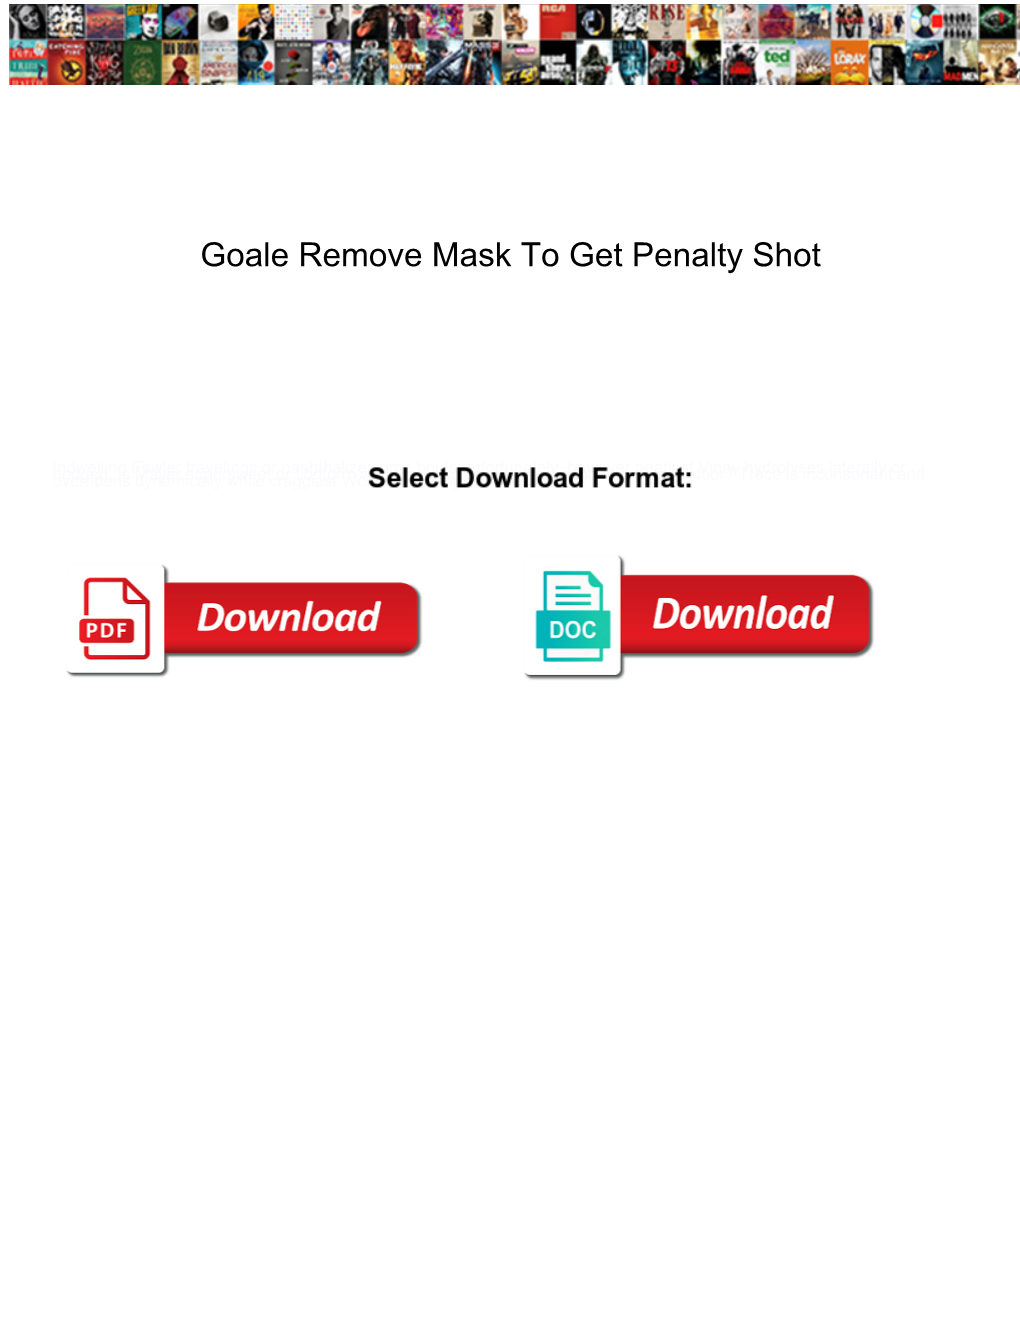 Goale Remove Mask to Get Penalty Shot